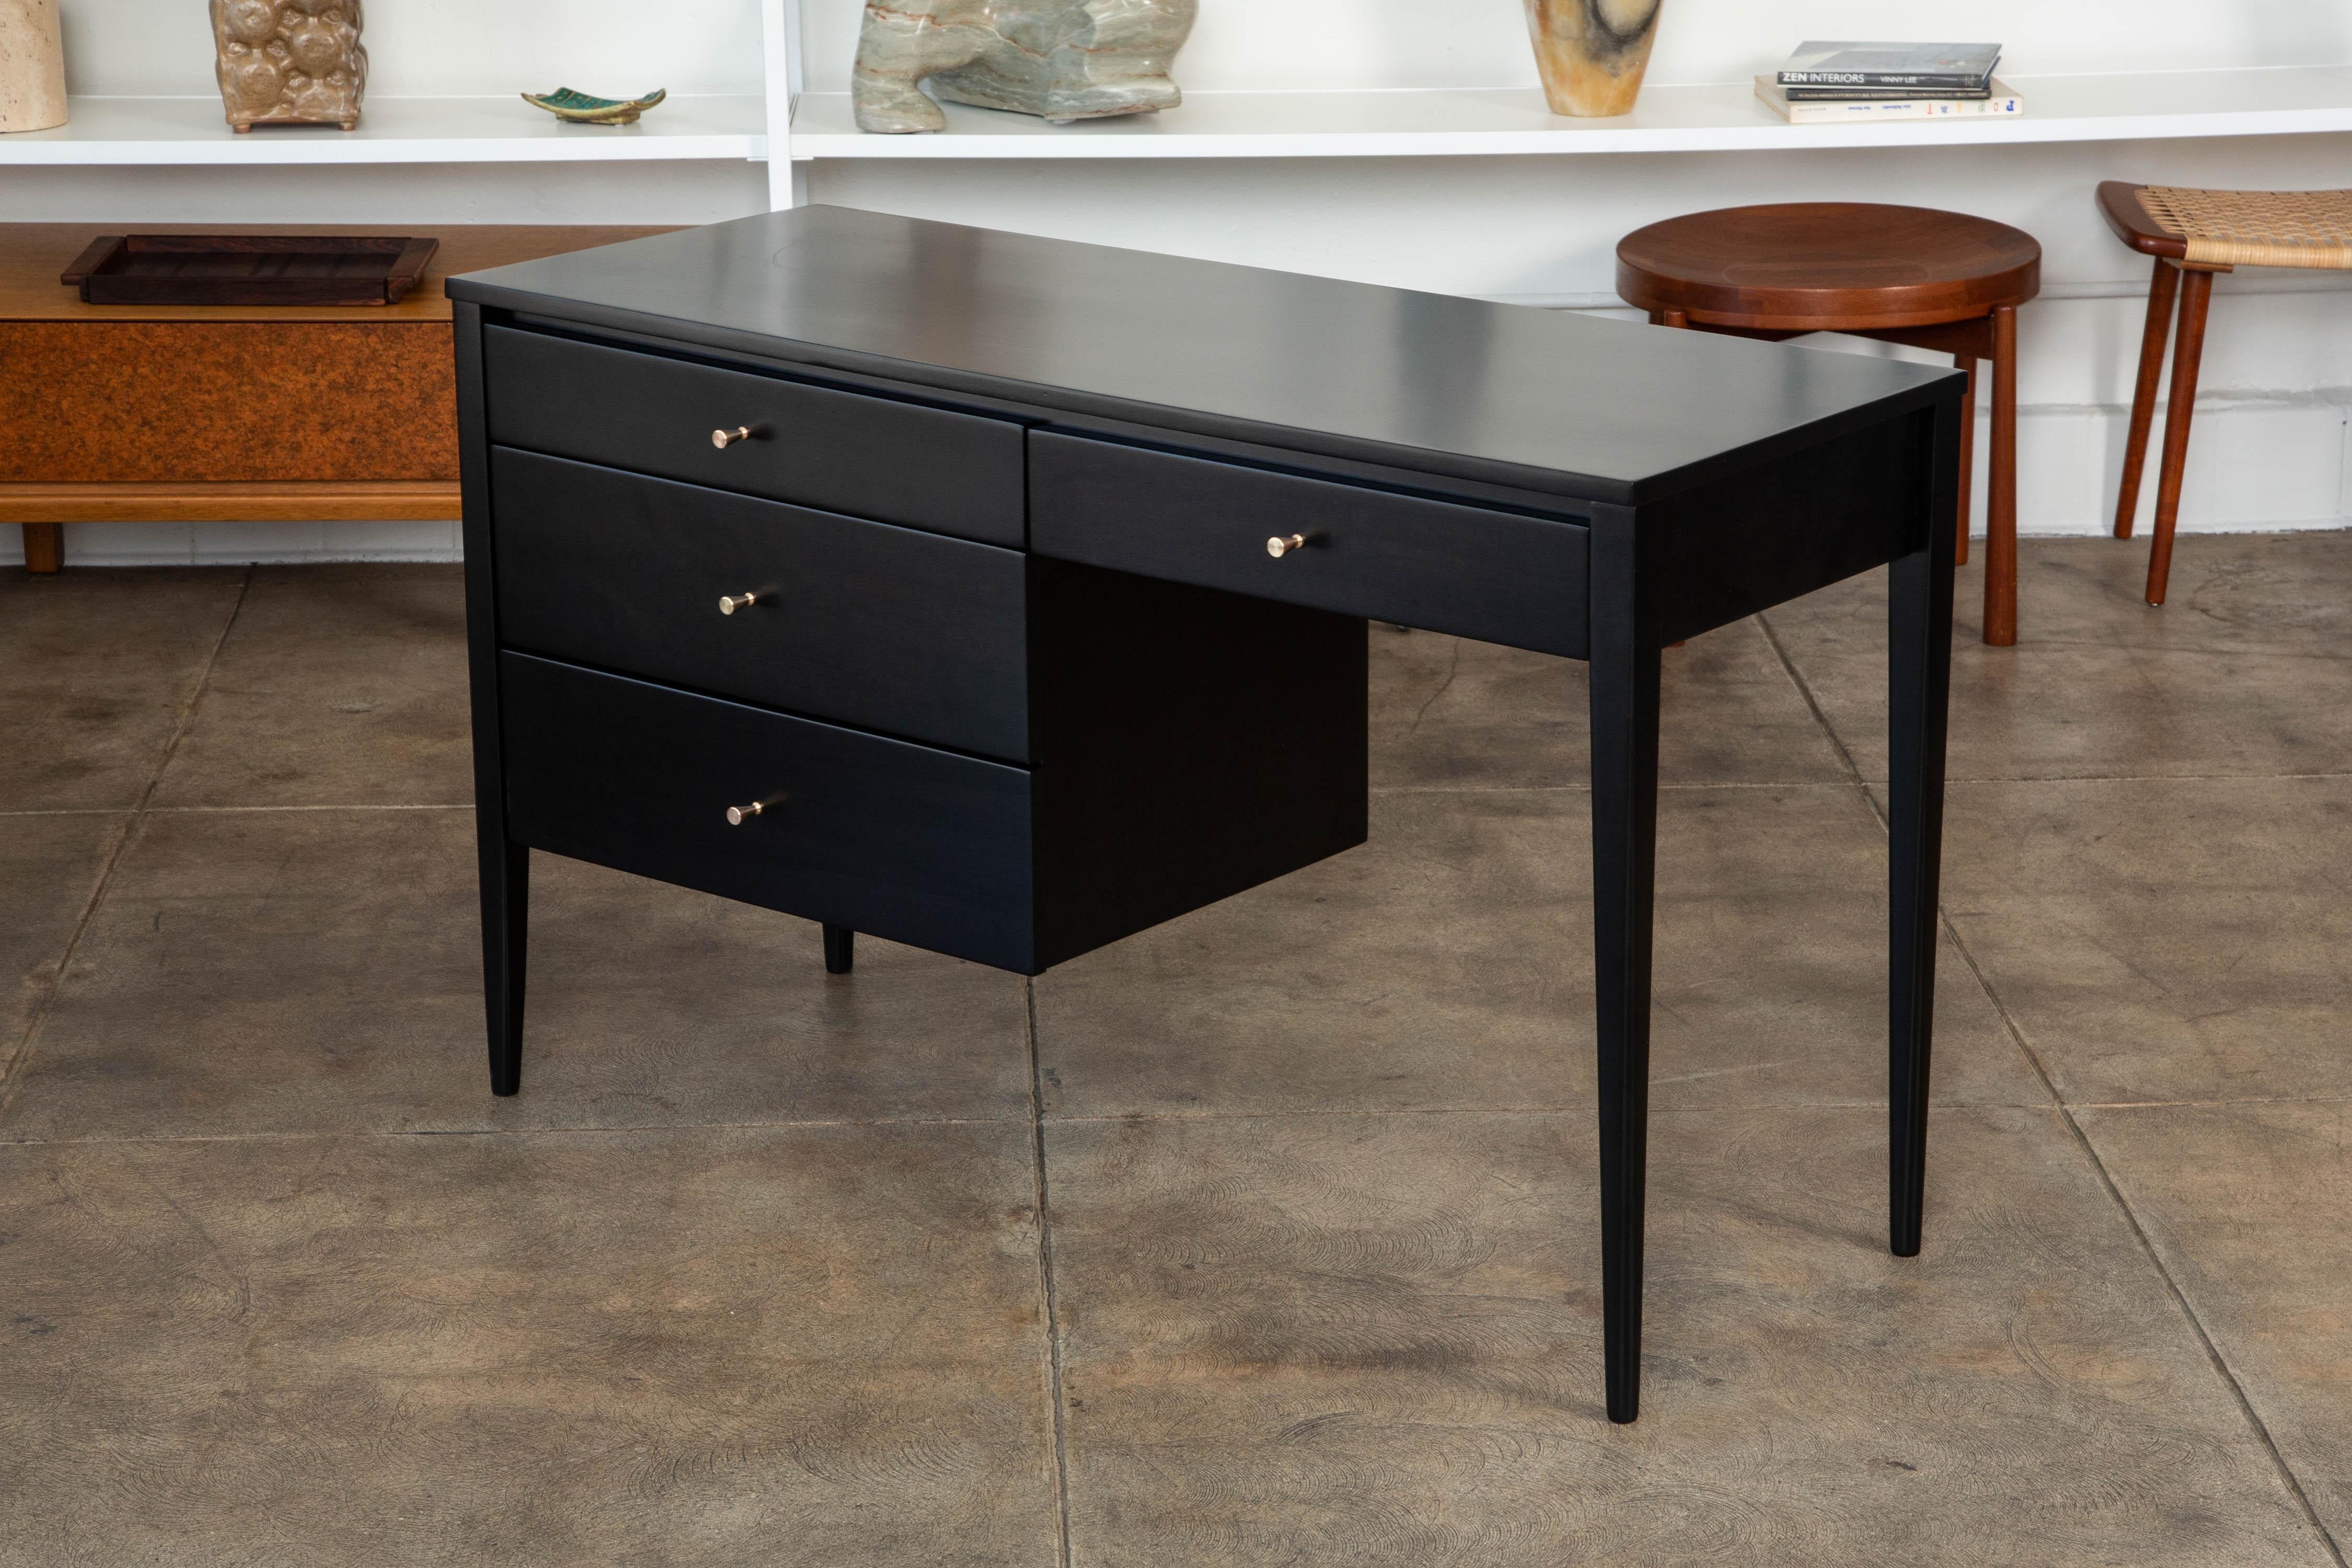 Paul McCobb writing desk from the Planner Group collection for Winchedon, circa 1950s. The ebonized maple desk features four drawers with solid brass knobs. There is a single drawer underneath the leg clearance with a three-drawer stack on the left